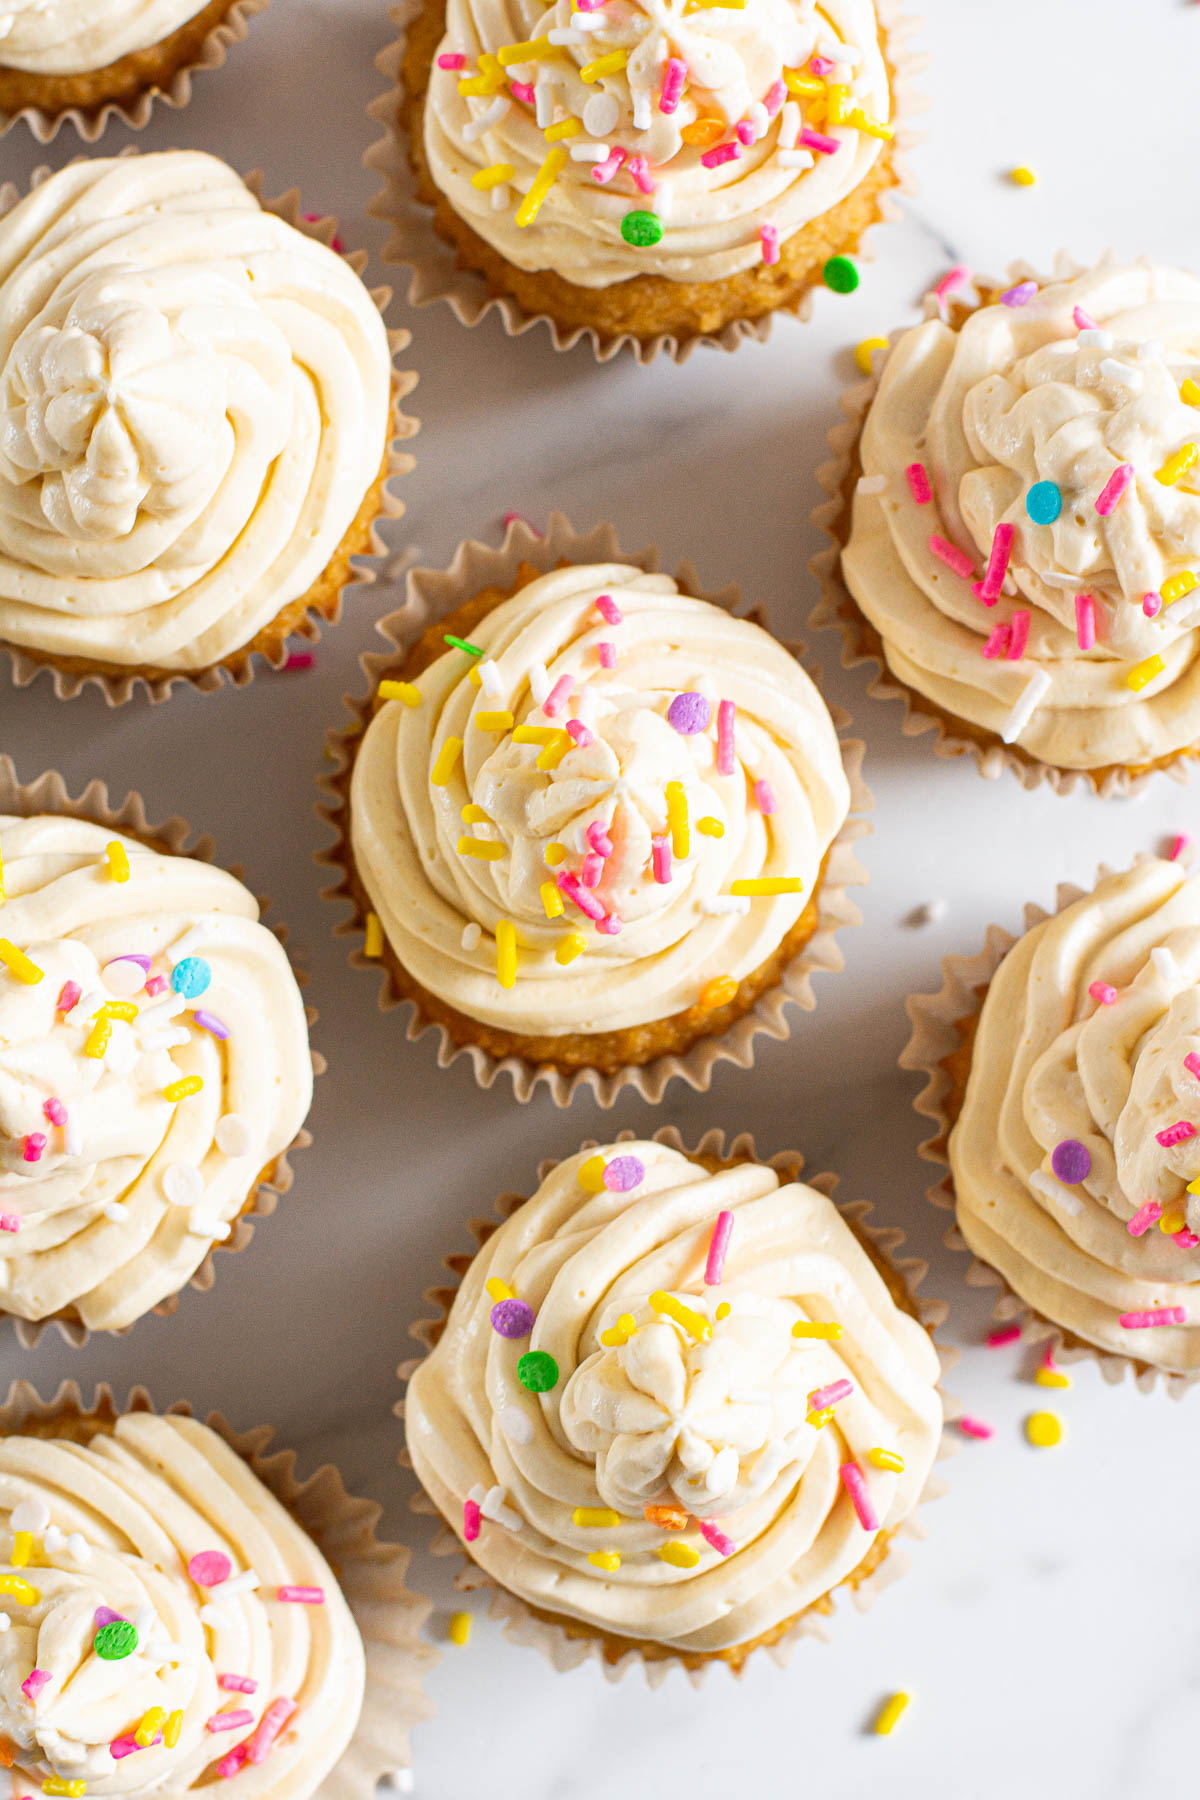 Looking down at healthy vanilla cupcakes with frosting and sprinkles.